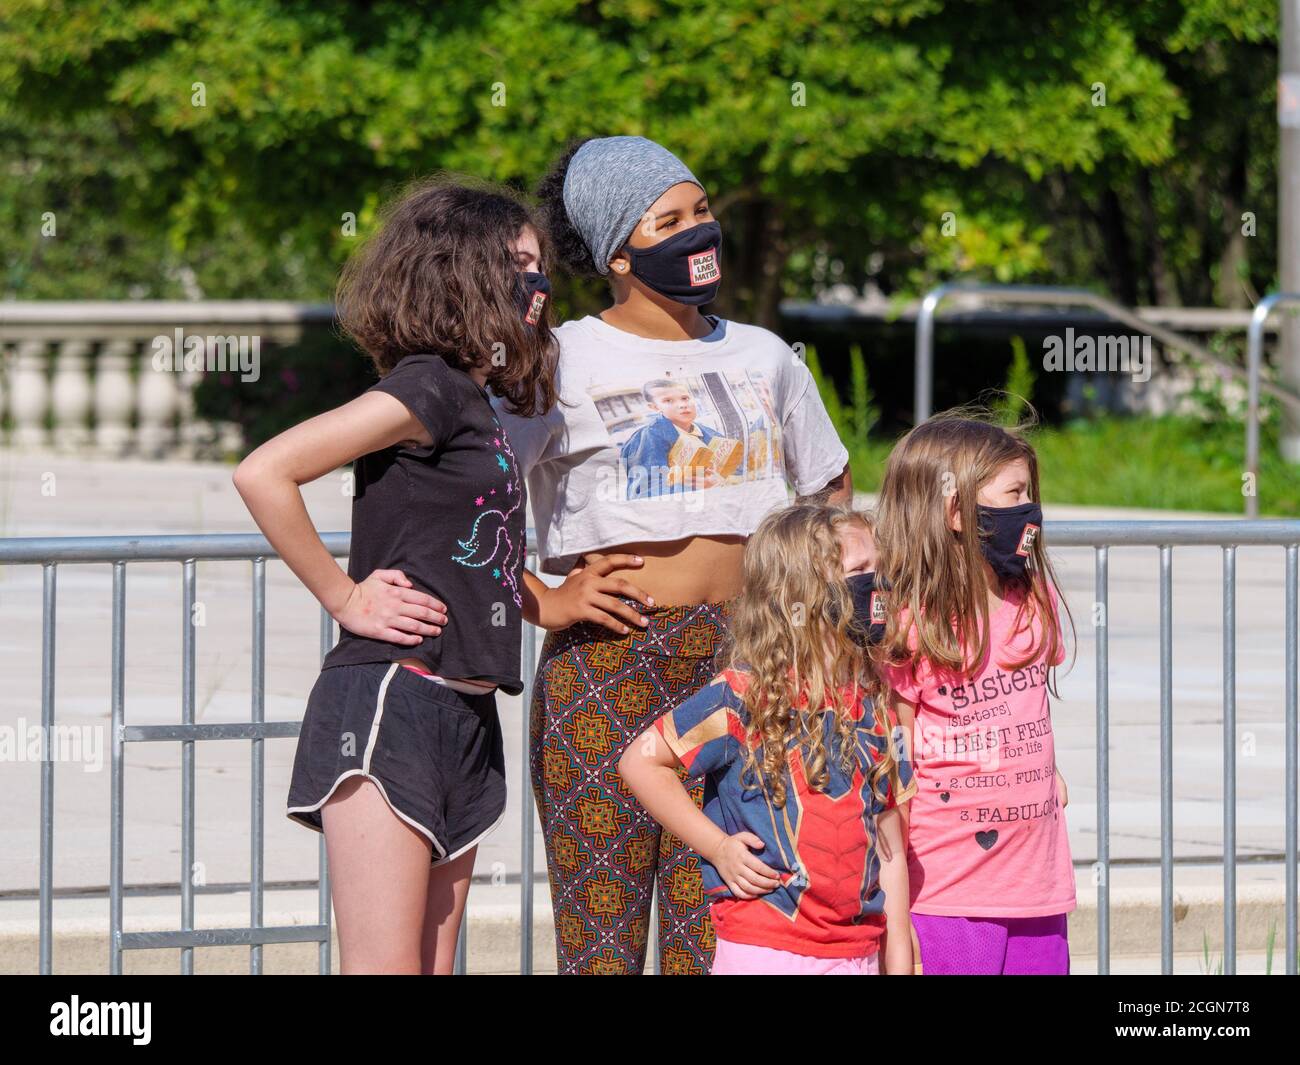 Young women and girls posing for photo, wearing face masks during COVID-19 pandemic. Millennium Park, Chicago, Illinois. Stock Photo